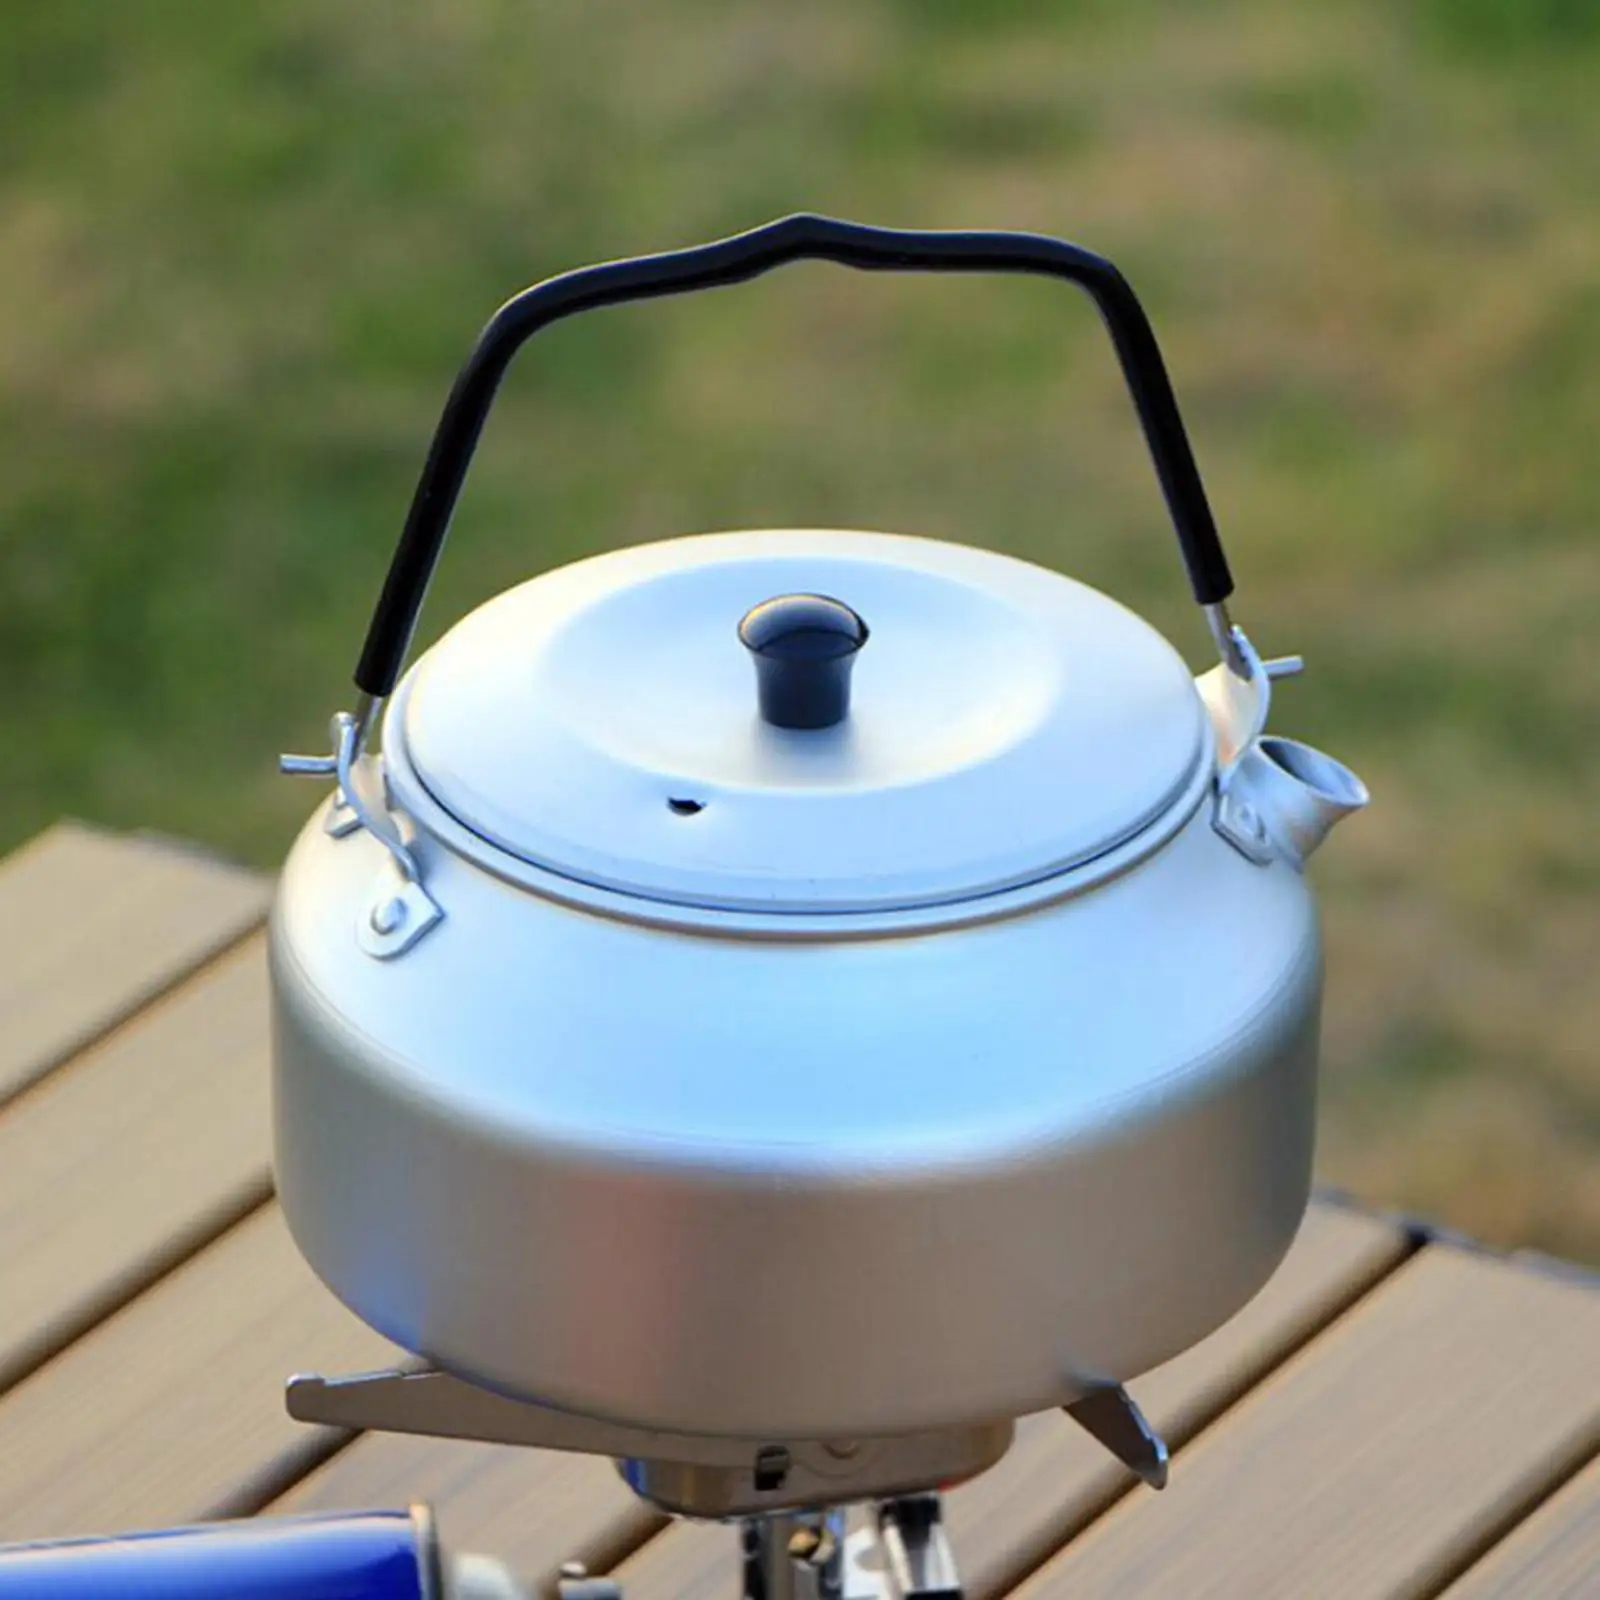 Camping Kettle for Boiling Water Camp  Pot Aluminum Alloy 0.8 L Outdoor Hiking Gear Portable Teapot Lightweight with Handle